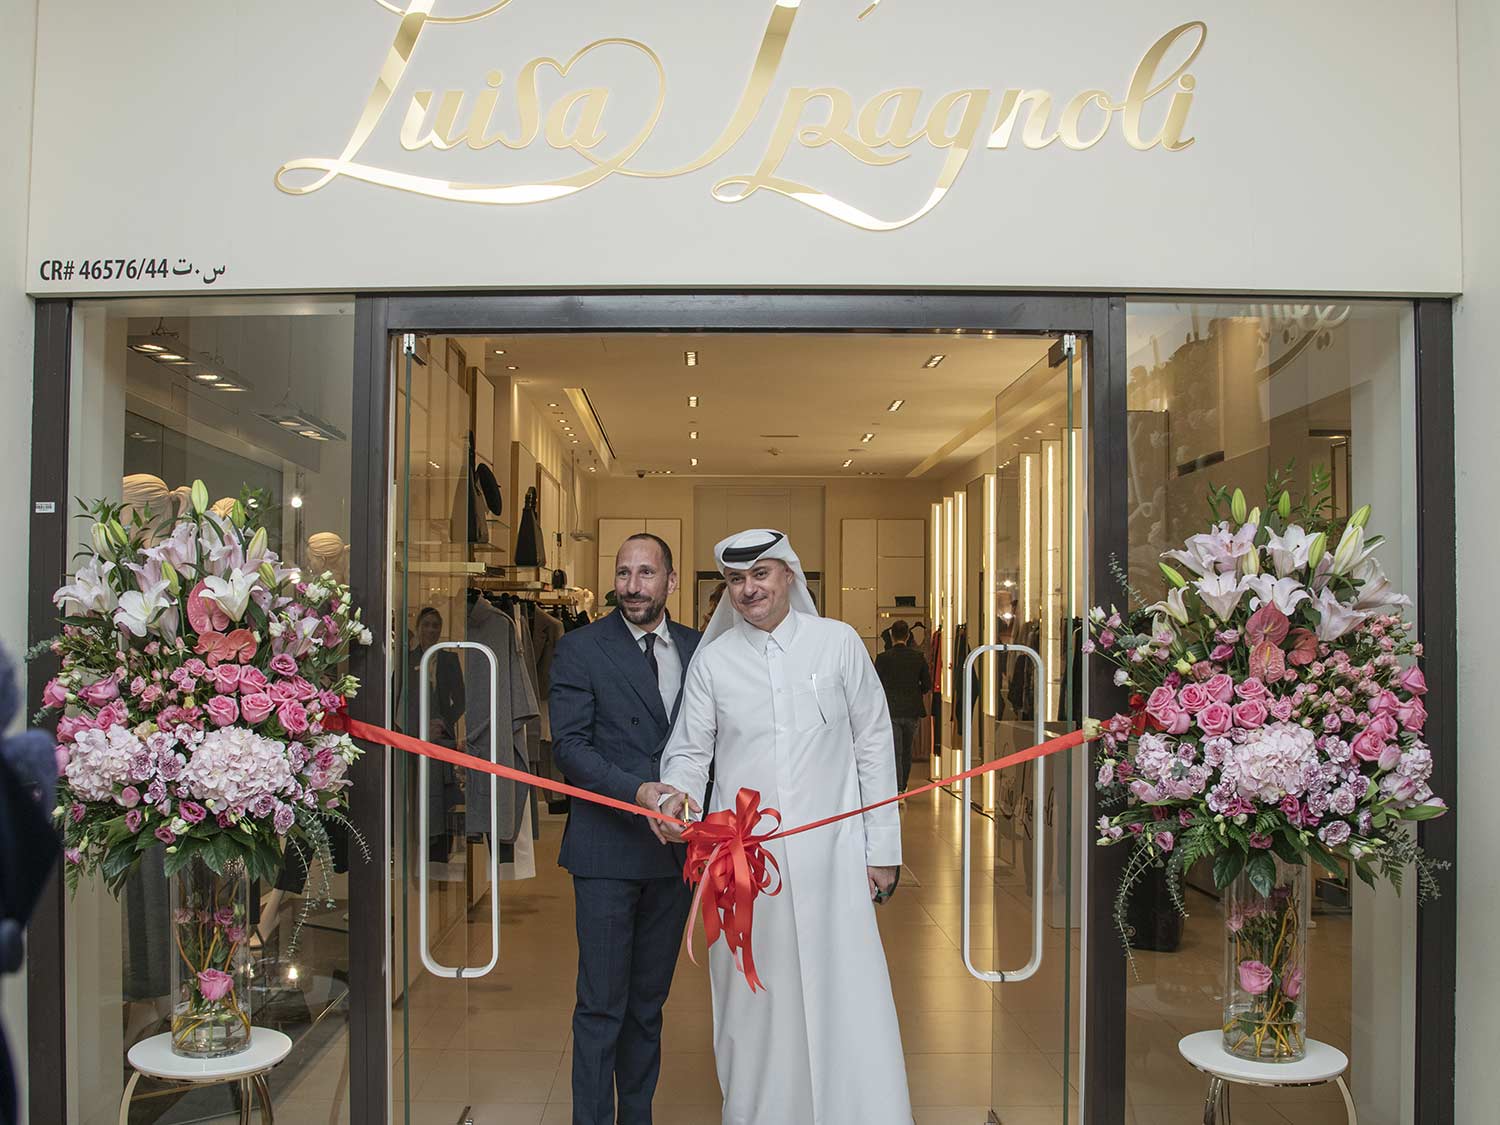 From Milan to Doha: The Heritage Brand “Luisa Spagnoli” Opens its First Flagship in Qatar